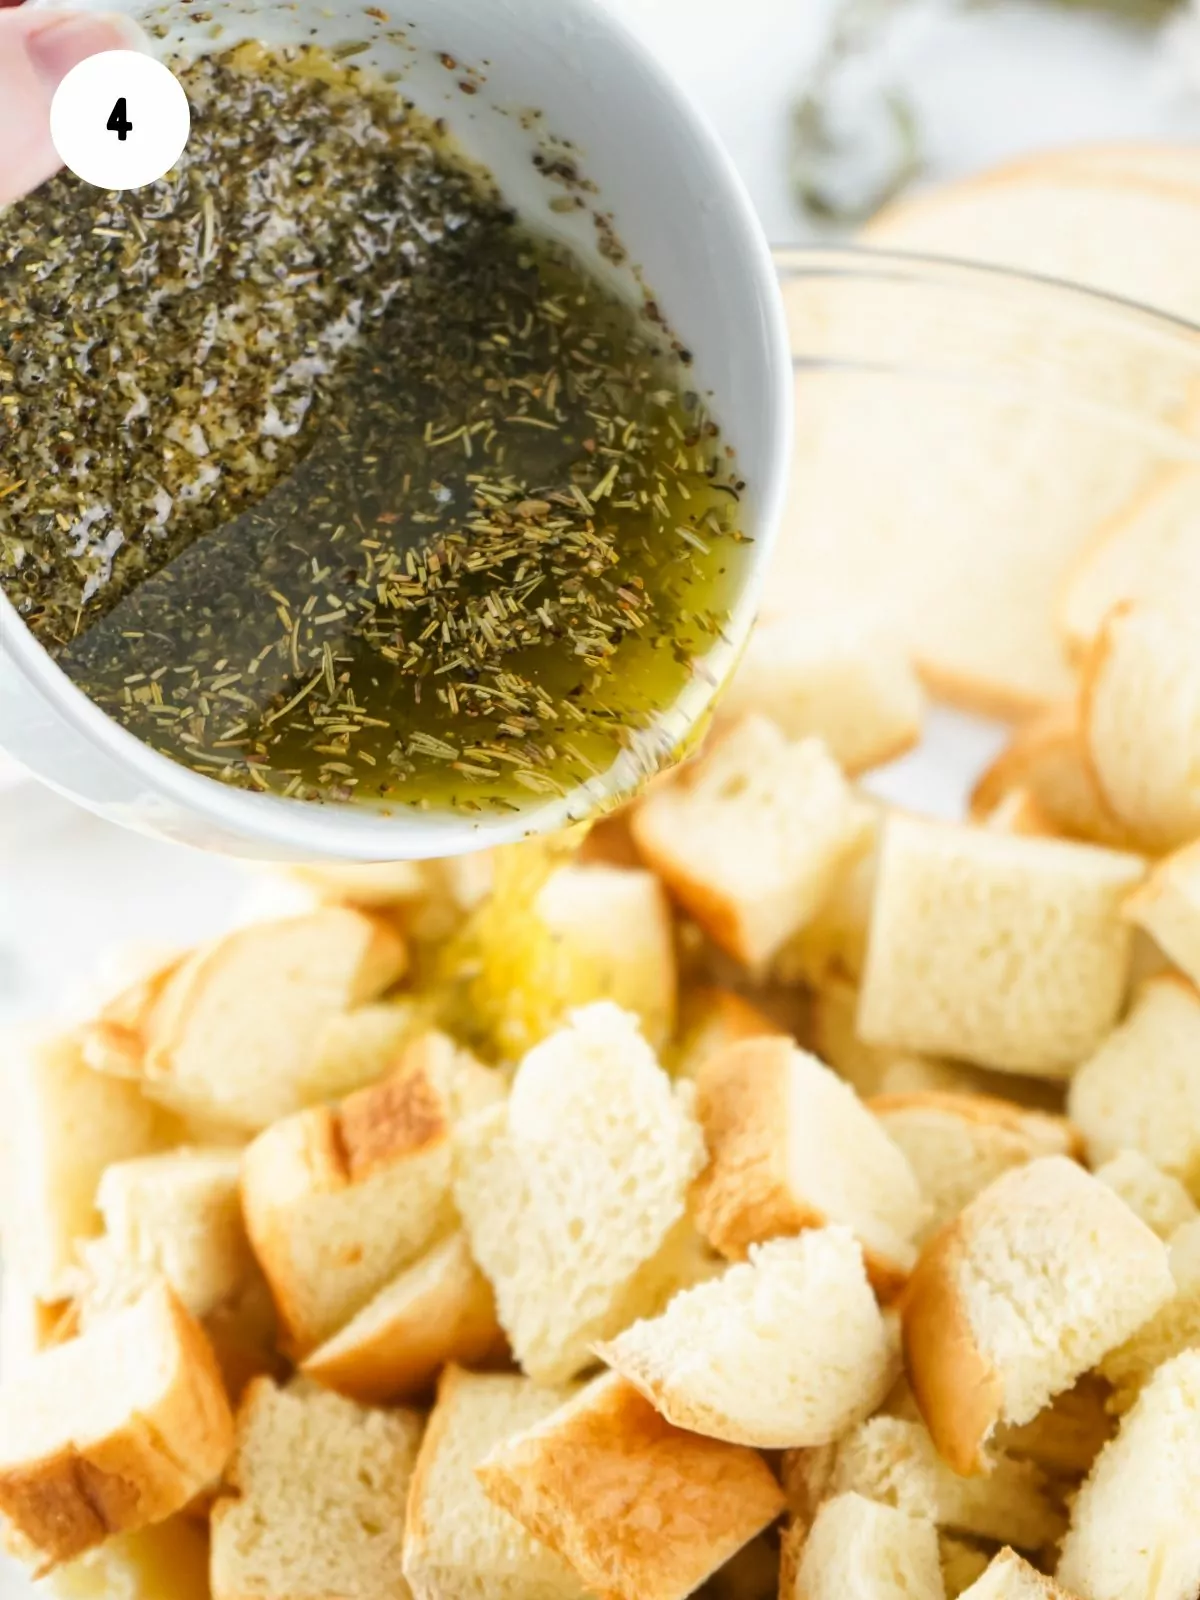 small bowl with melted butter and herbs being poured on top of cubed bread.